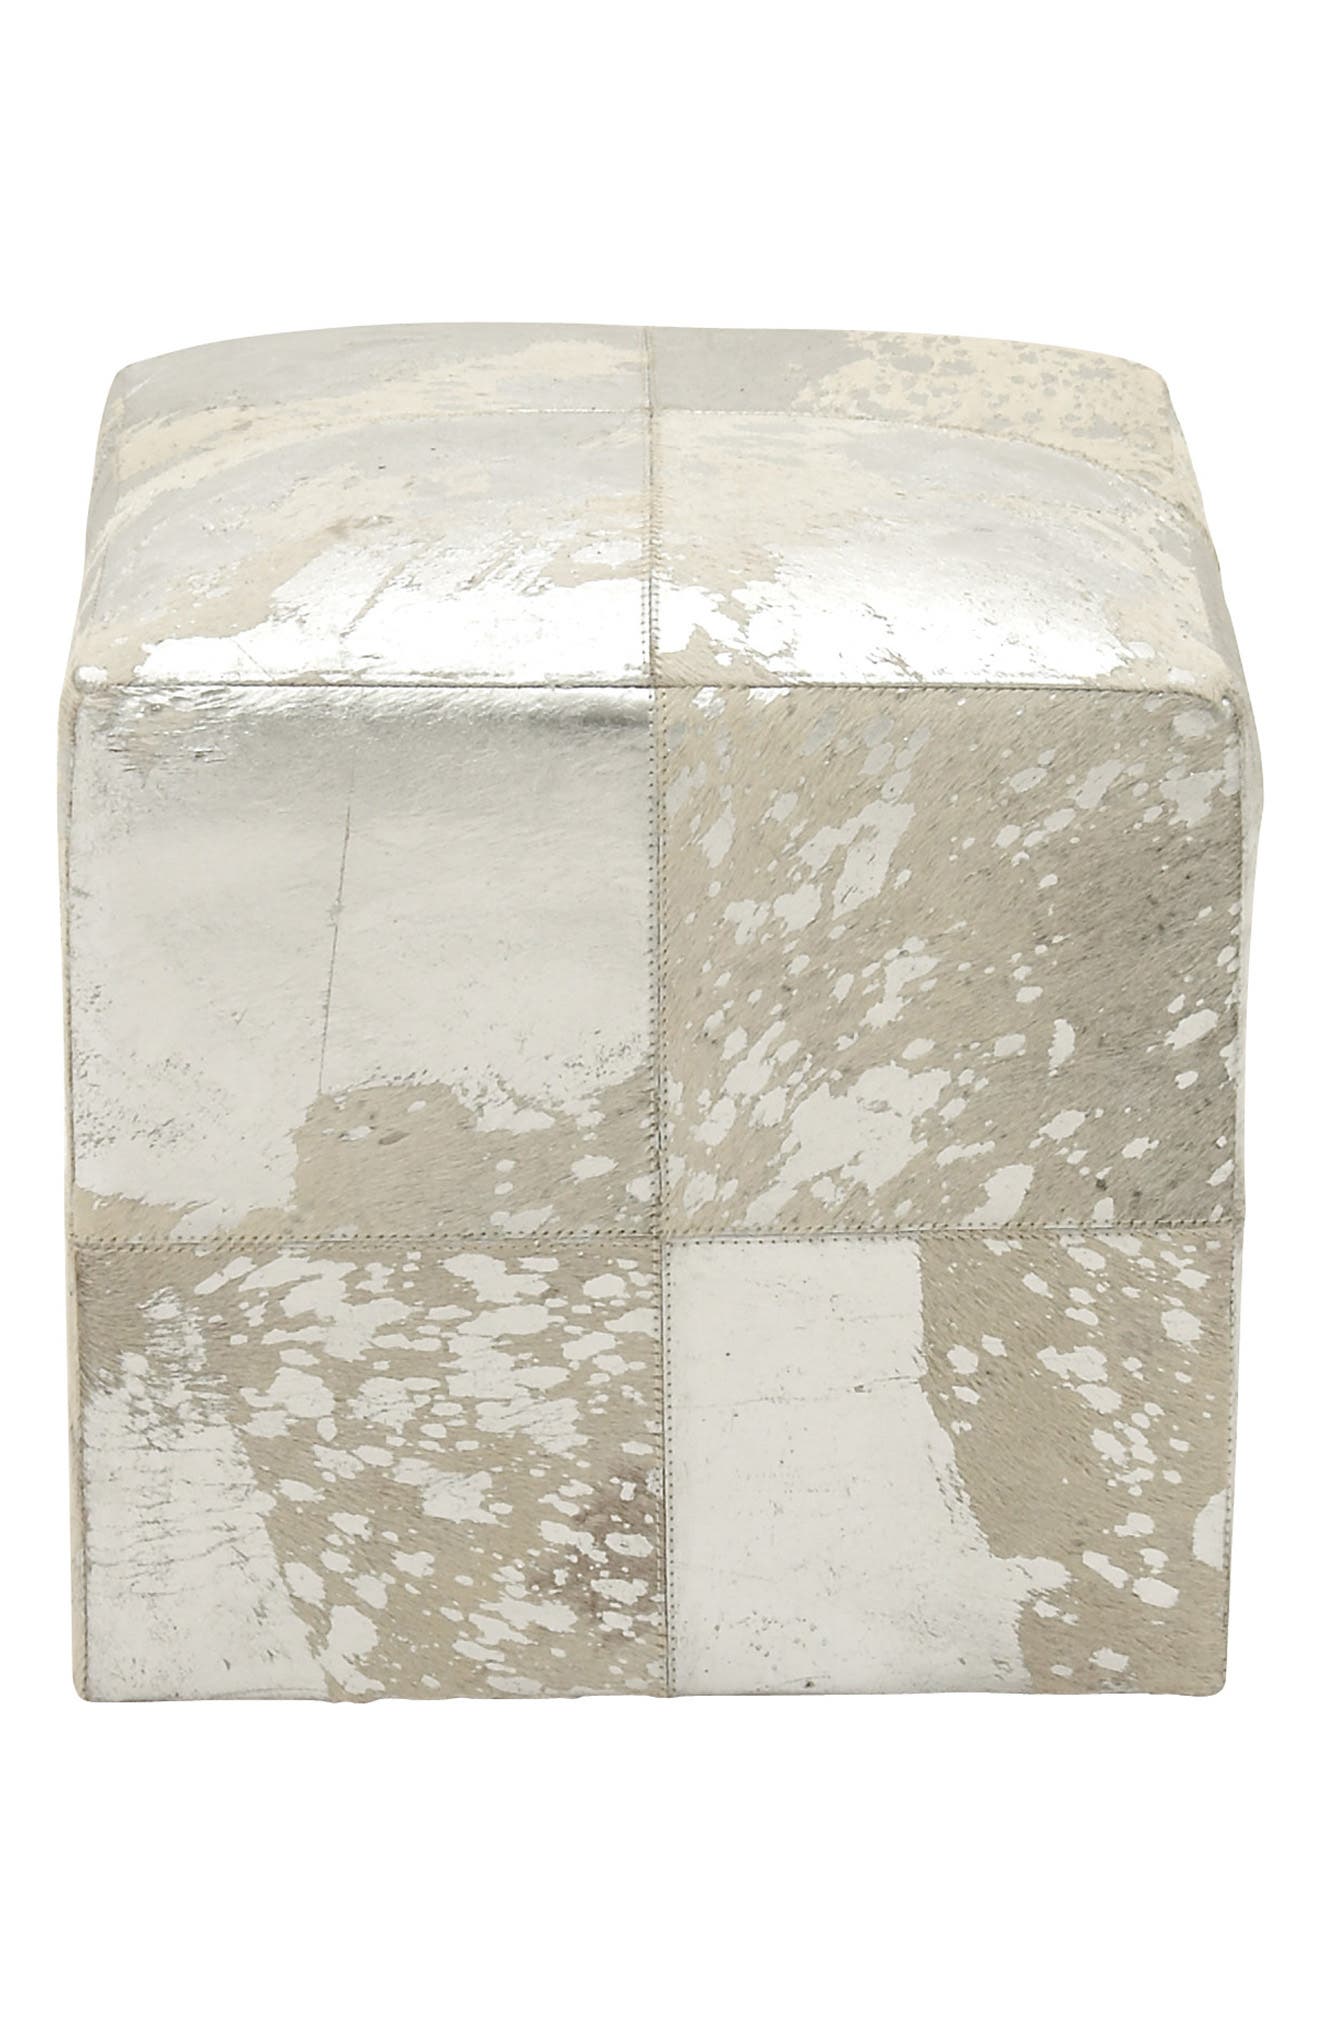 Willow Row Silver/white Leather Hide Ottoman